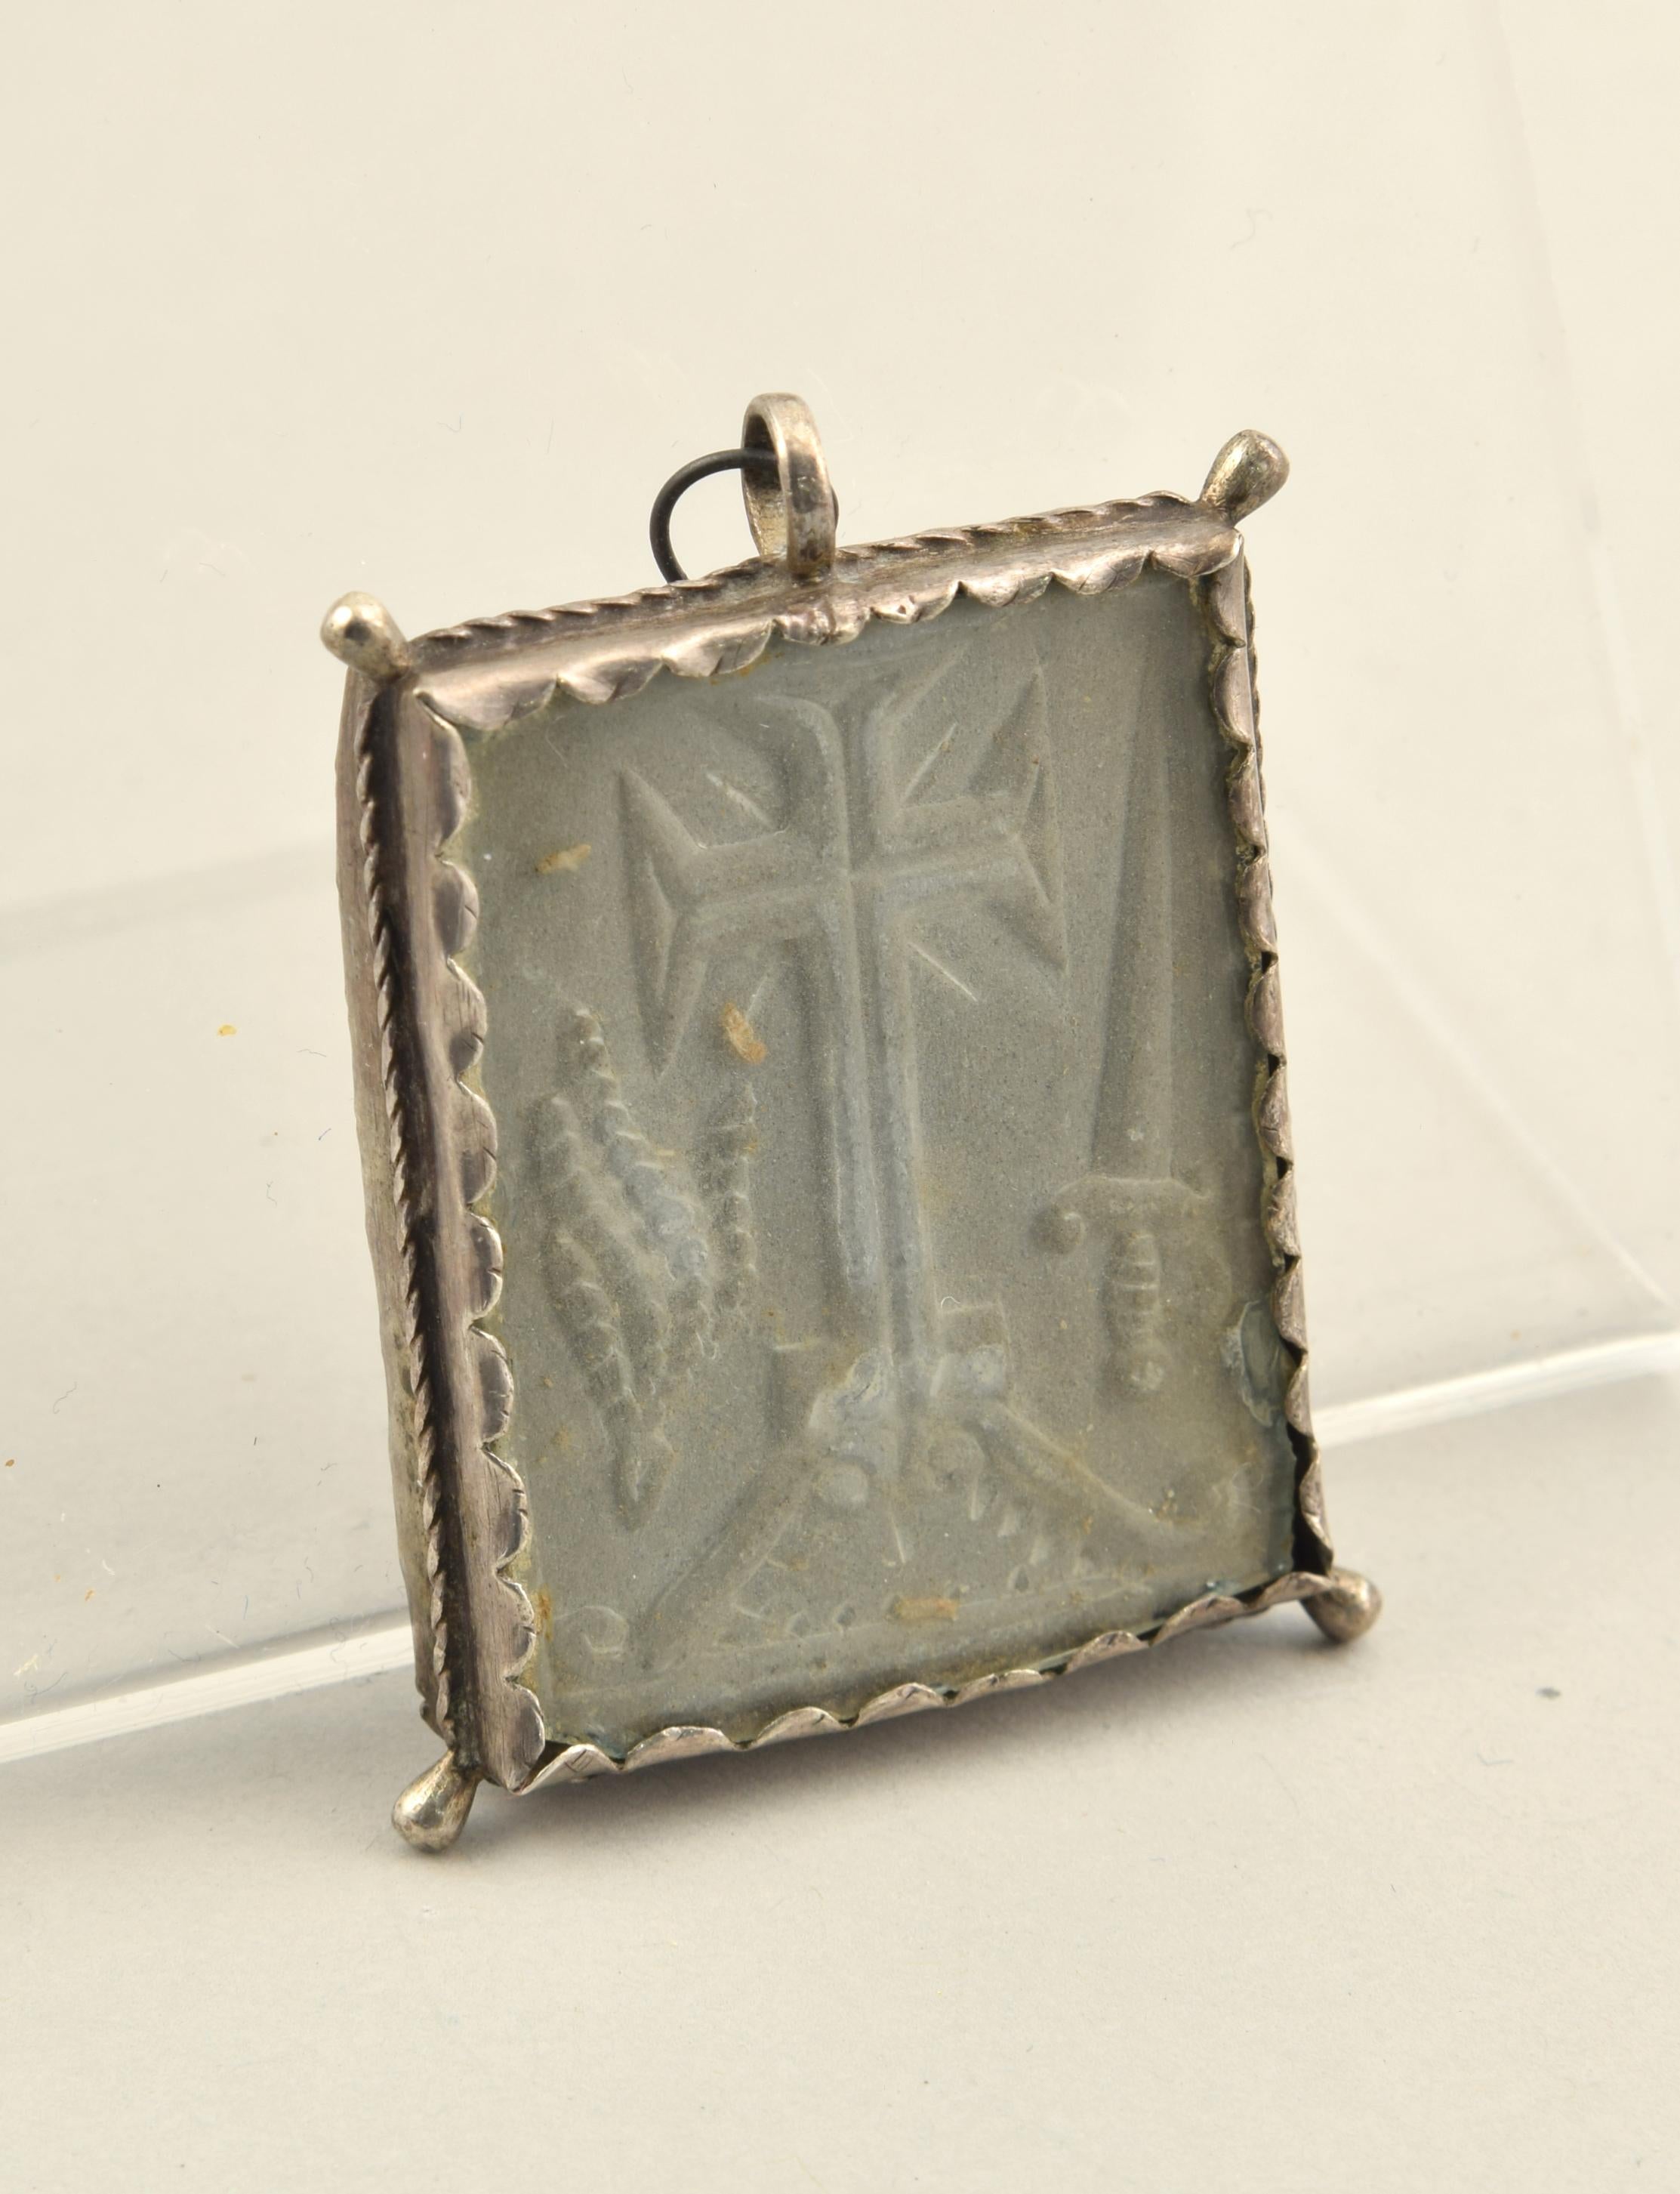 Medal of the Virgen de Nieva with inquisitorial shield. Slate, silver. Spain, 17th century. 
Silver frame.
Devotional medal composed of a silver frame, with corrugations to hold two transparent plates, four pearls in the corners and a ring in the